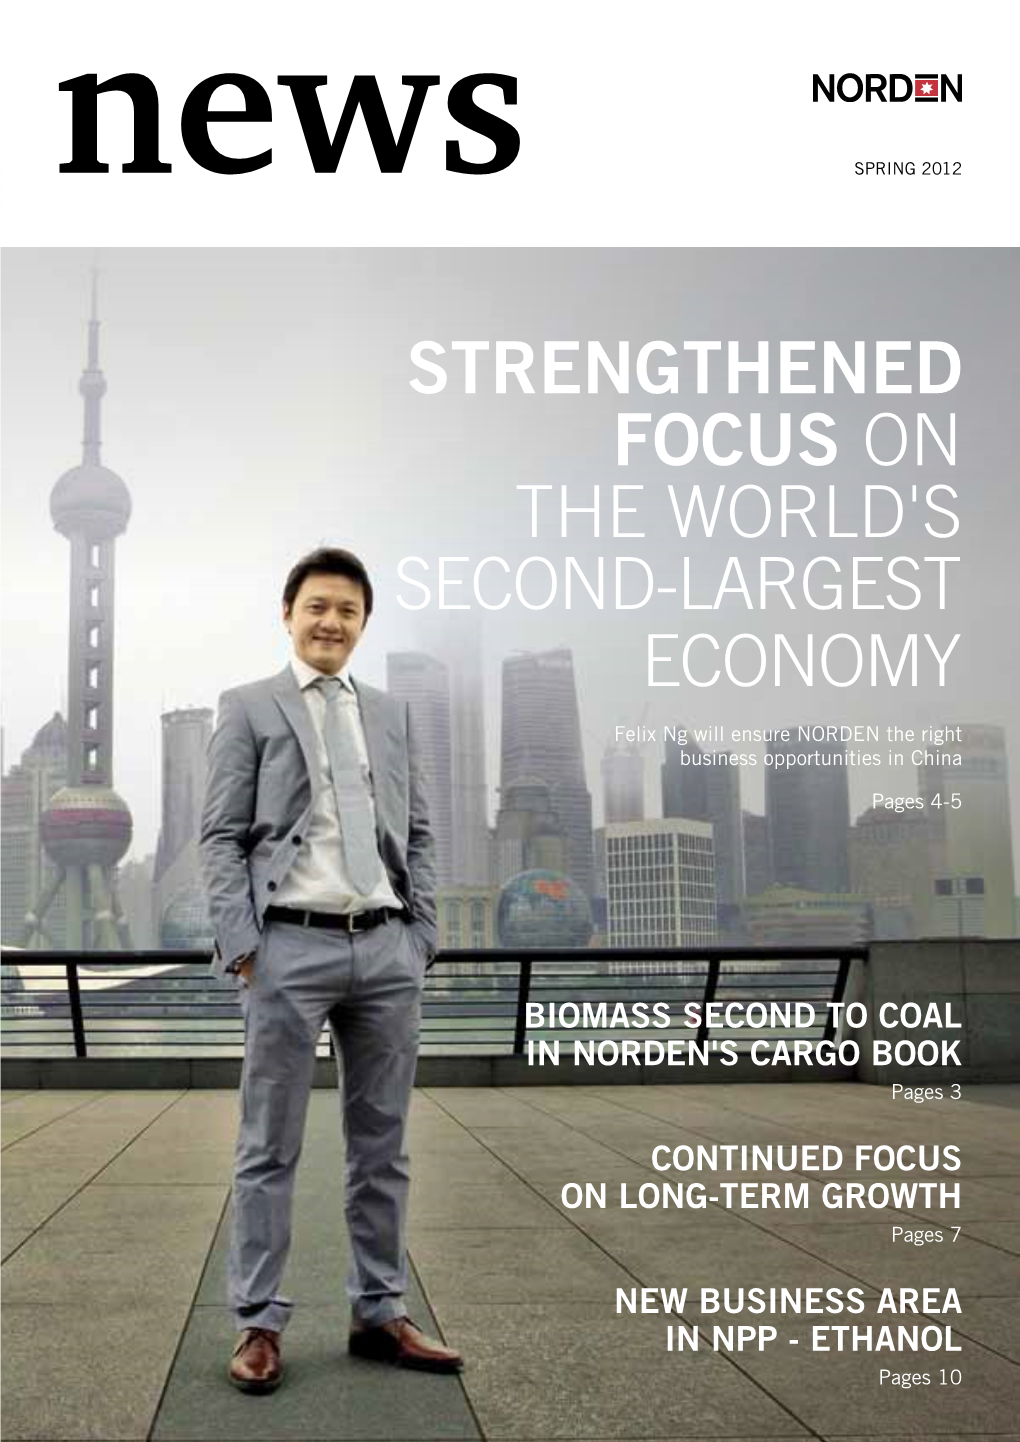 Strengthened Focus on the World's Second-Largest Economy